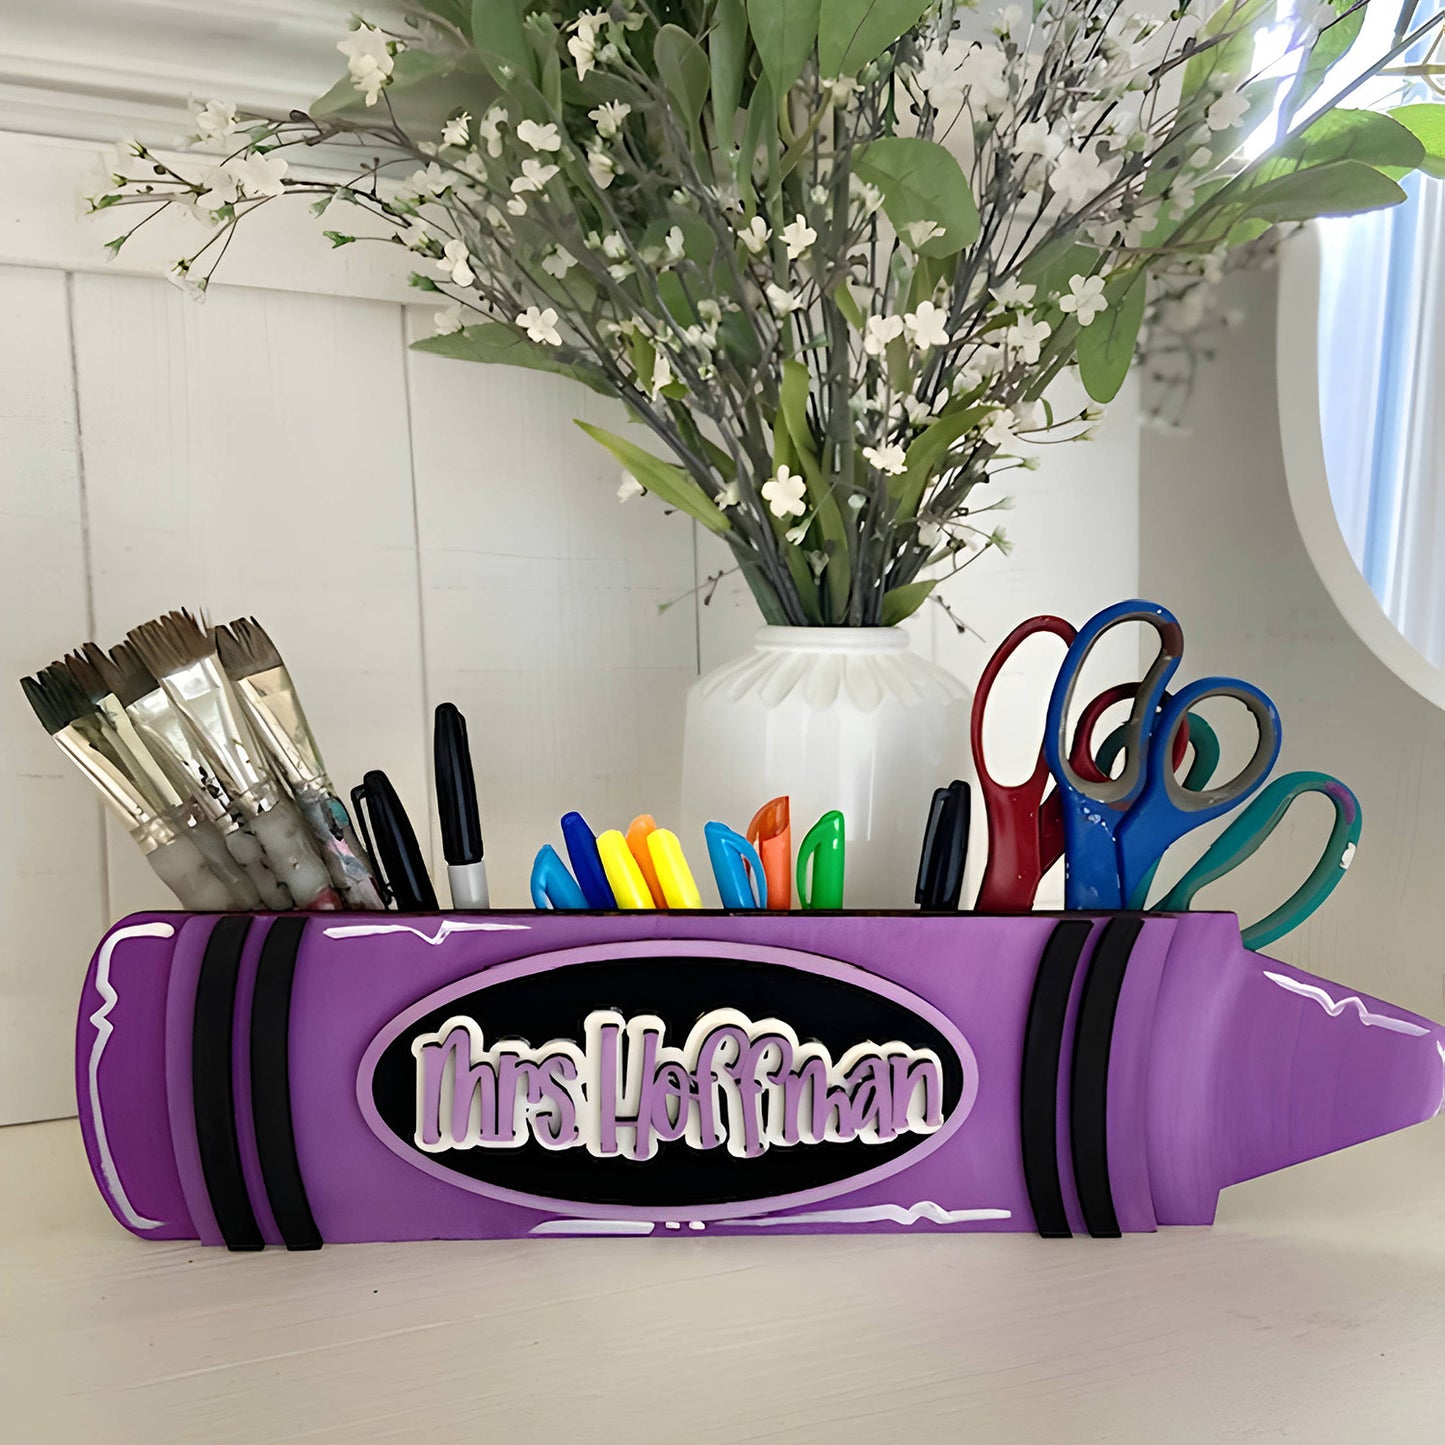 Personalized Teacher Name Crayon Sign - Classroom Supply Holder